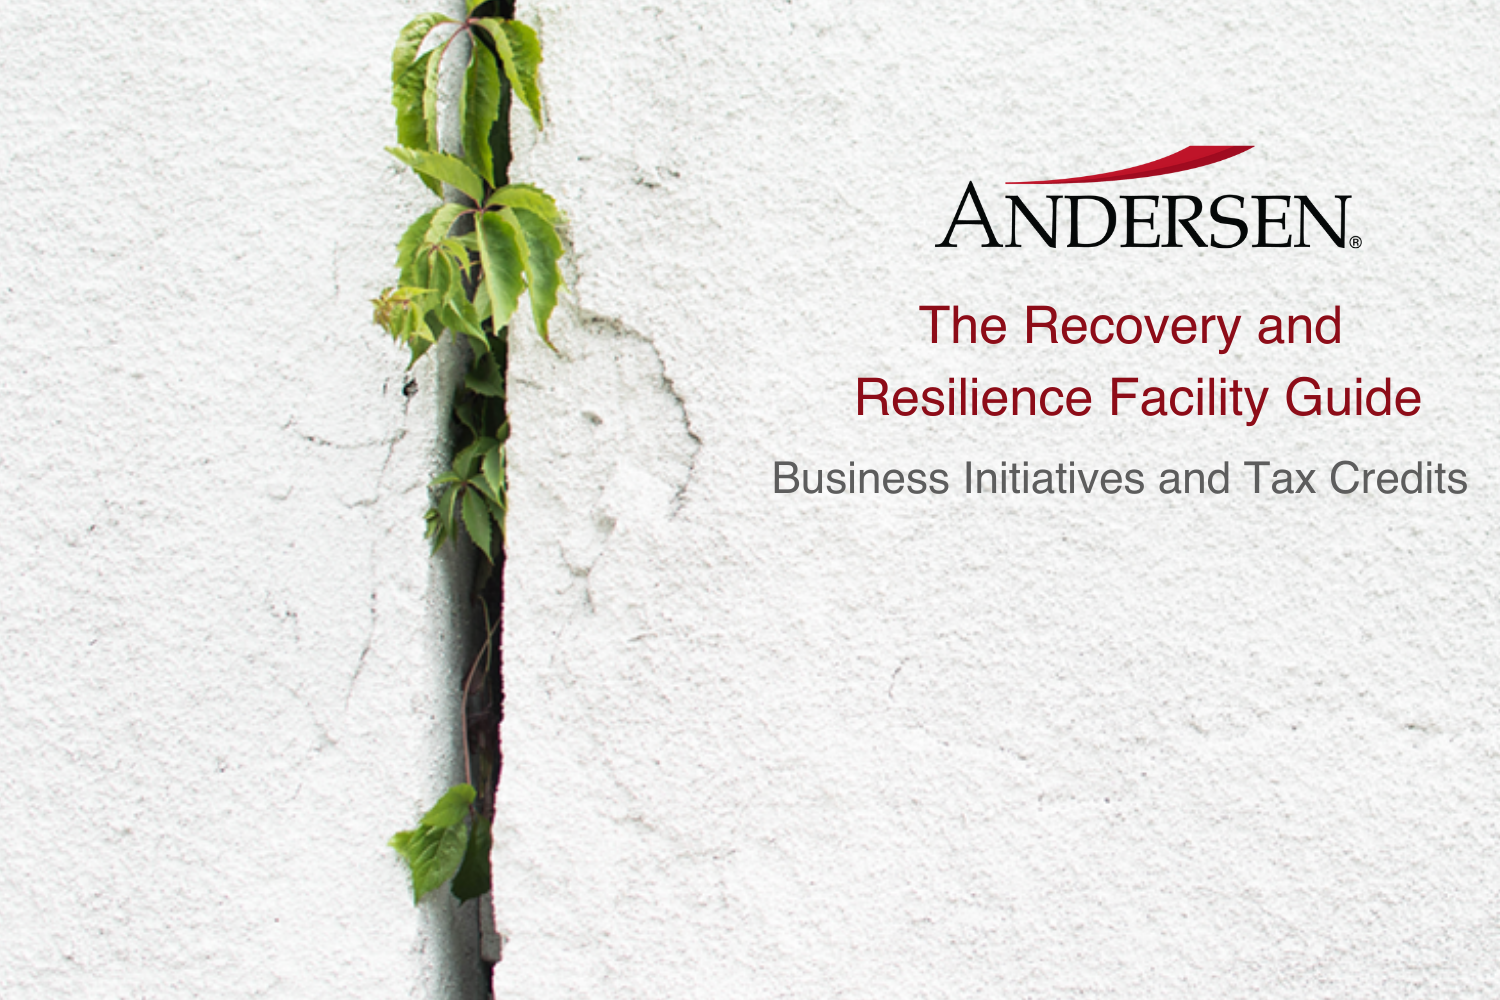 The Resilience and Recovery Guide